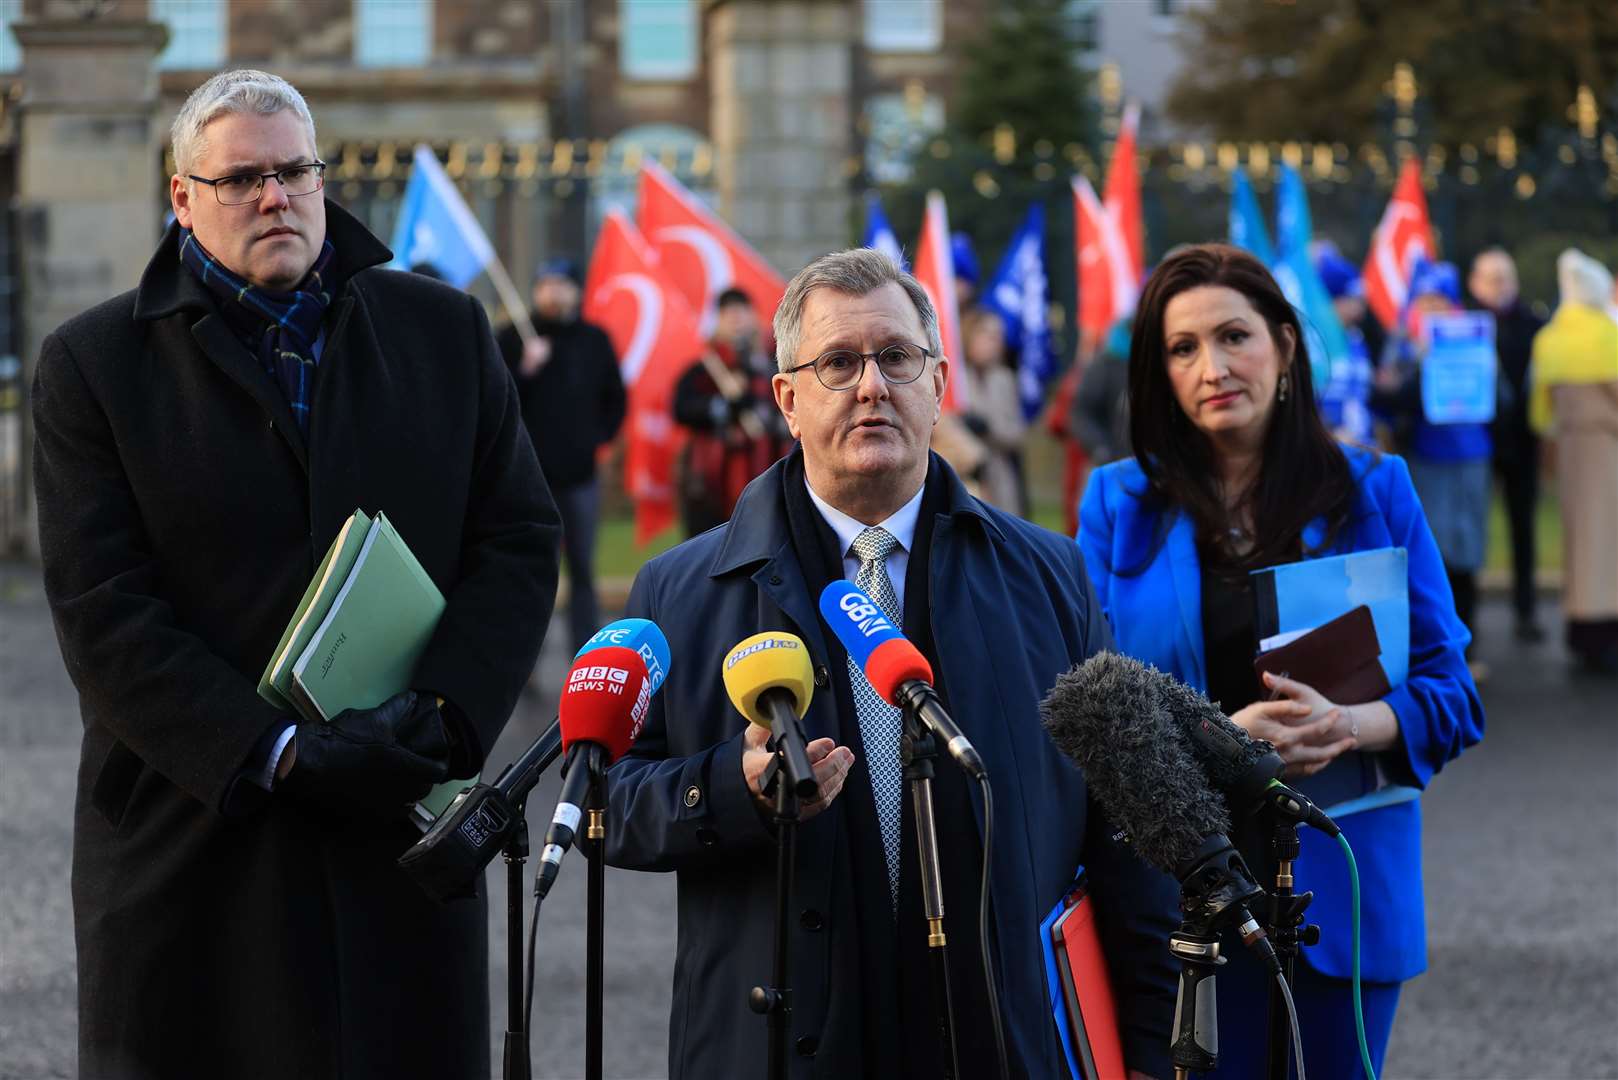 DUP leader Sir Jeffrey Donaldson (centre) speaking to the media with Emma Little-Pengelly and Deputy Leader of the DUP Gavin Robinson outside Hillsborough Castle (Liam McBurney/PA)